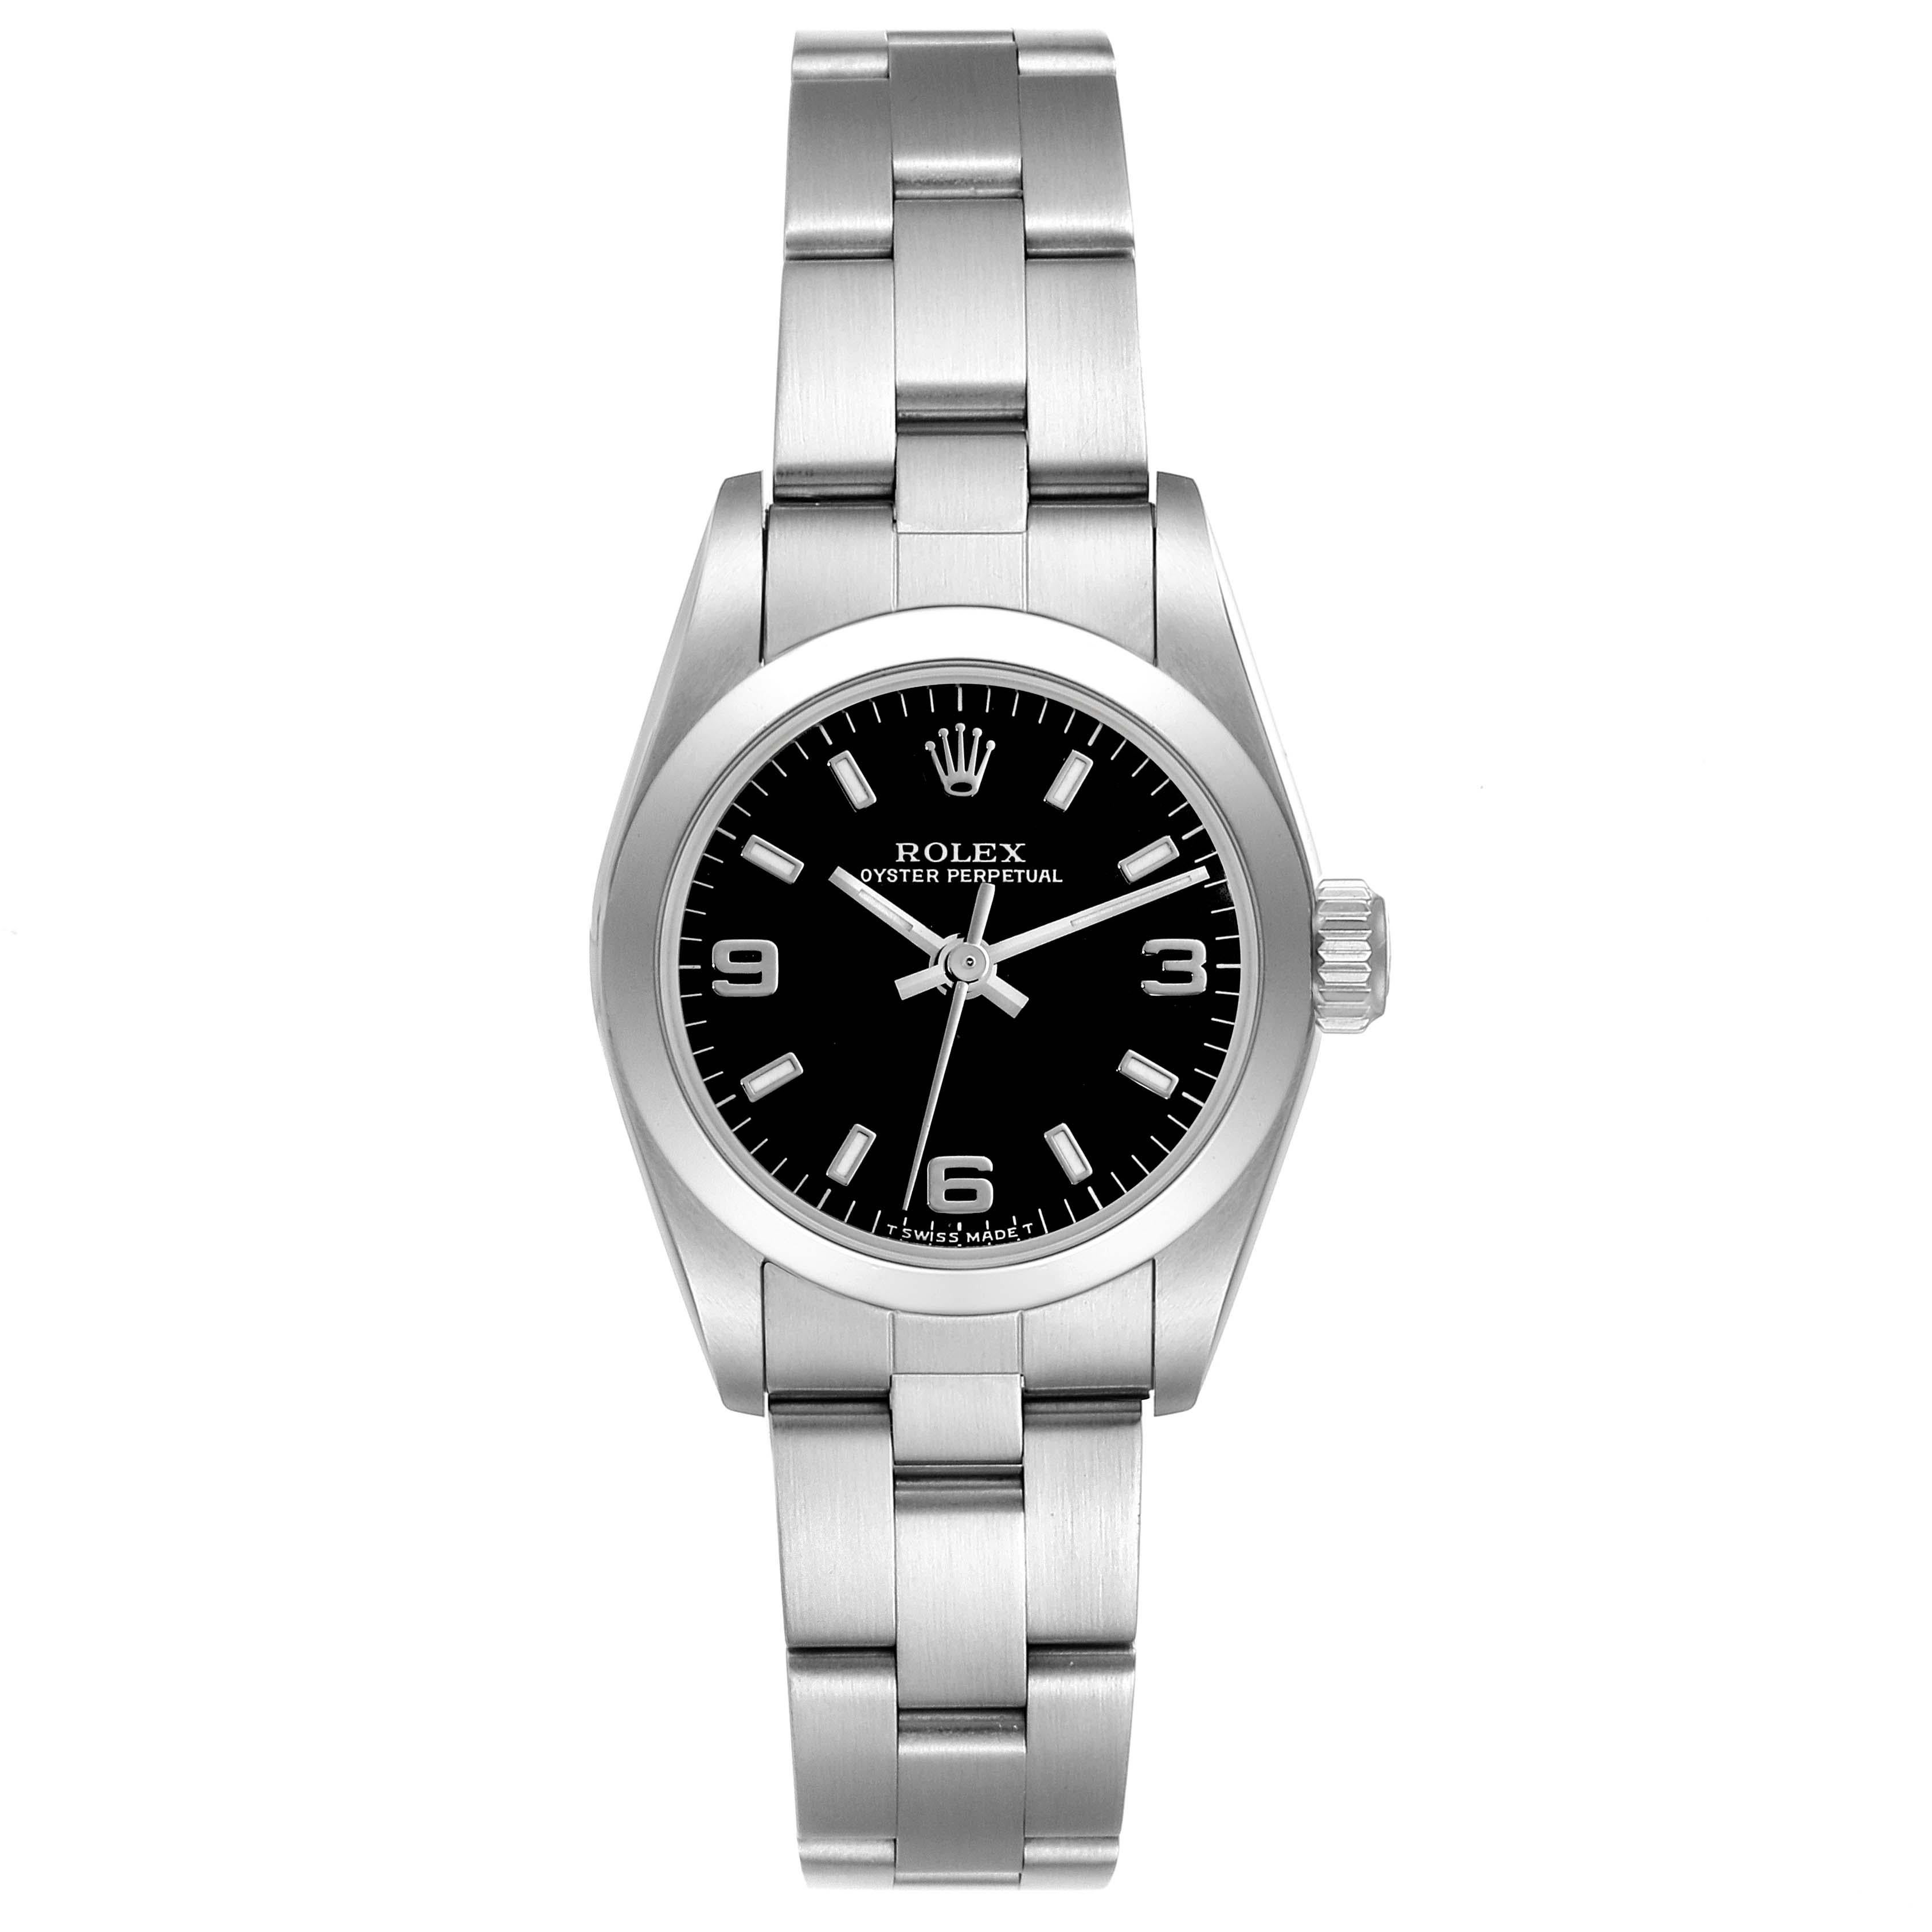 Rolex Oyster Perpetual Steel Black Dial Ladies Watch 67180. Officially certified chronometer automatic self-winding movement. Stainless steel oyster case 24.0 mm in diameter. Rolex logo on a crown. Stainless steel smooth domed bezel. Scratch